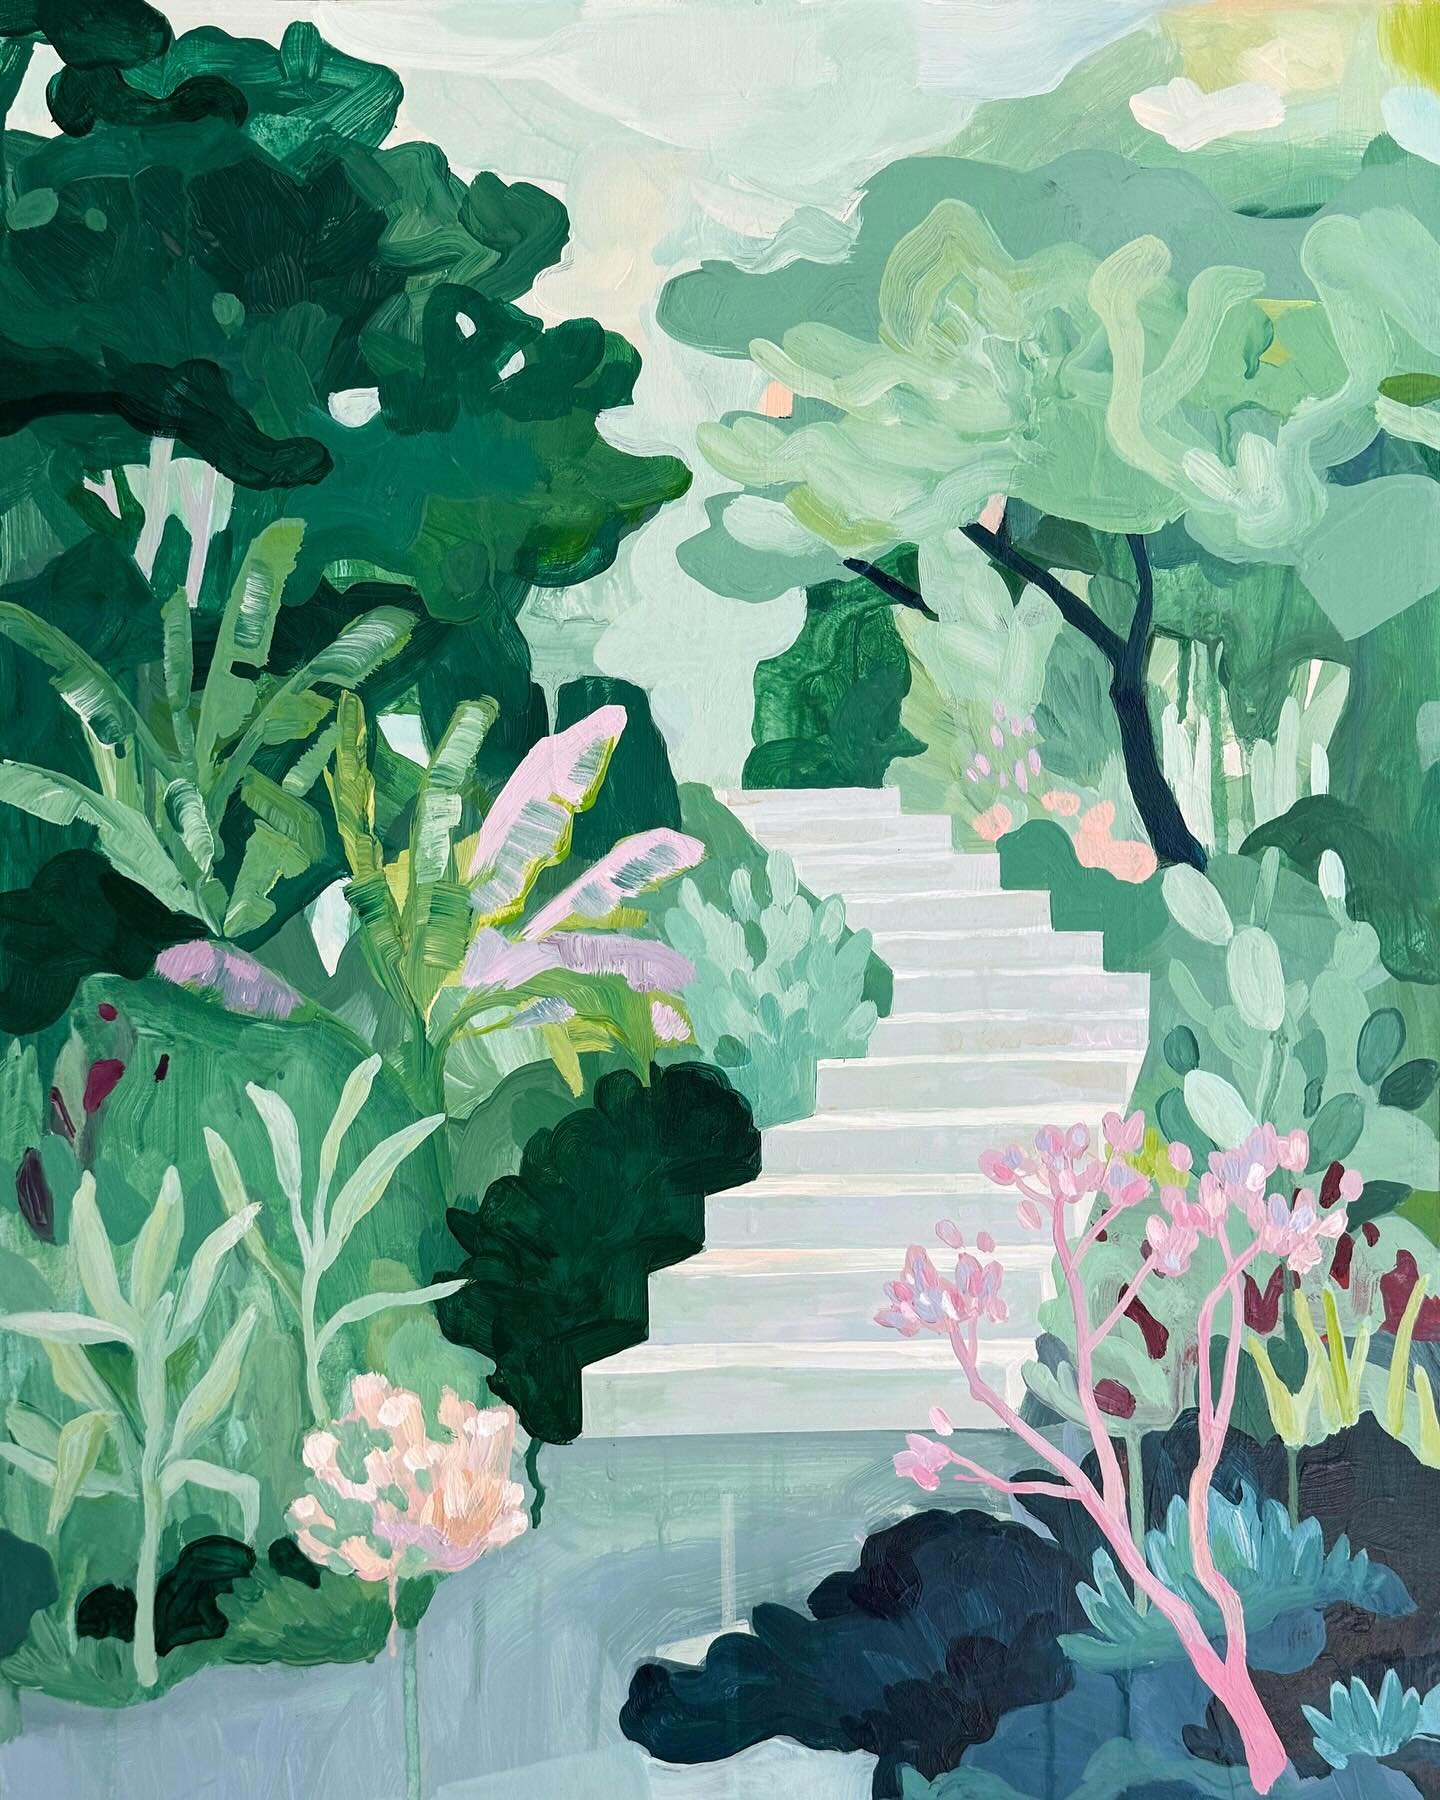 THE GARDEN STAIRWAY

This year I am playing on new medium, I said. So this one step toward my goal. More to come !

Acrylic paint on wood
.
.
.
.
#paintingonwood #paintingwood #acrylicpainters #acrylicpainter #frenchartiste #lostinland #elodieperrier